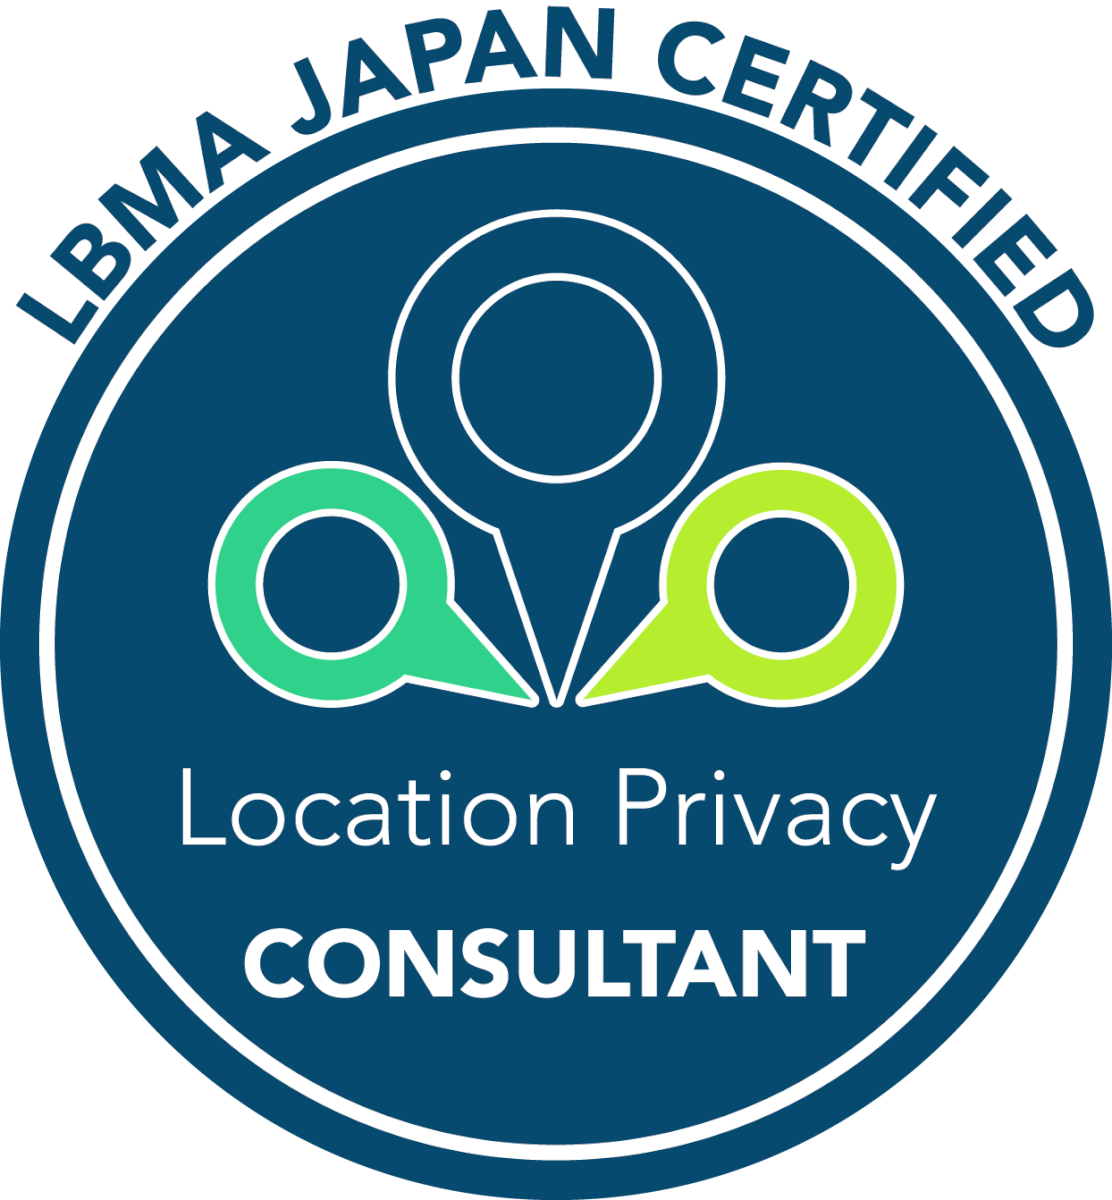 Location Privacyマーク